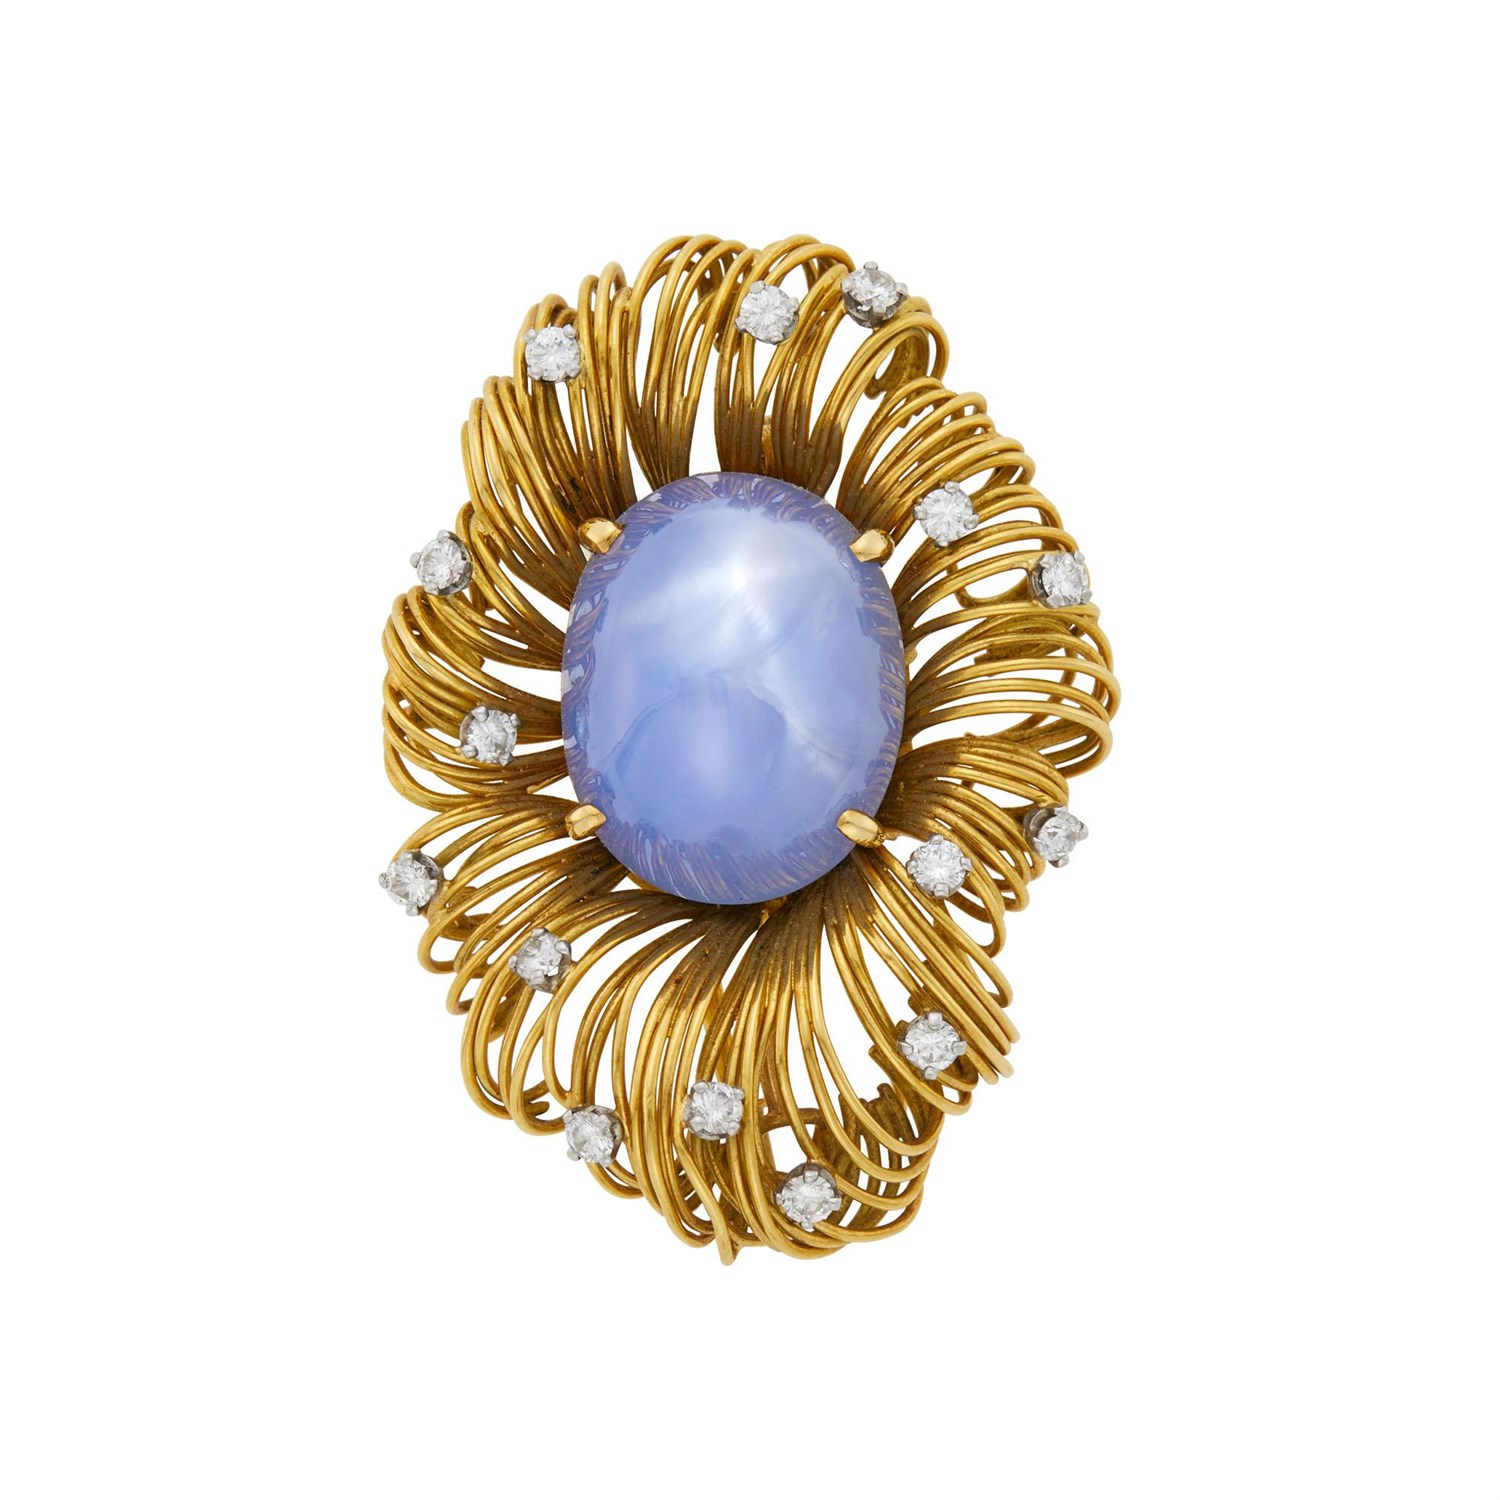 Lot 66 - Gold, Star Sapphire and Diamond Clip-Brooch, France